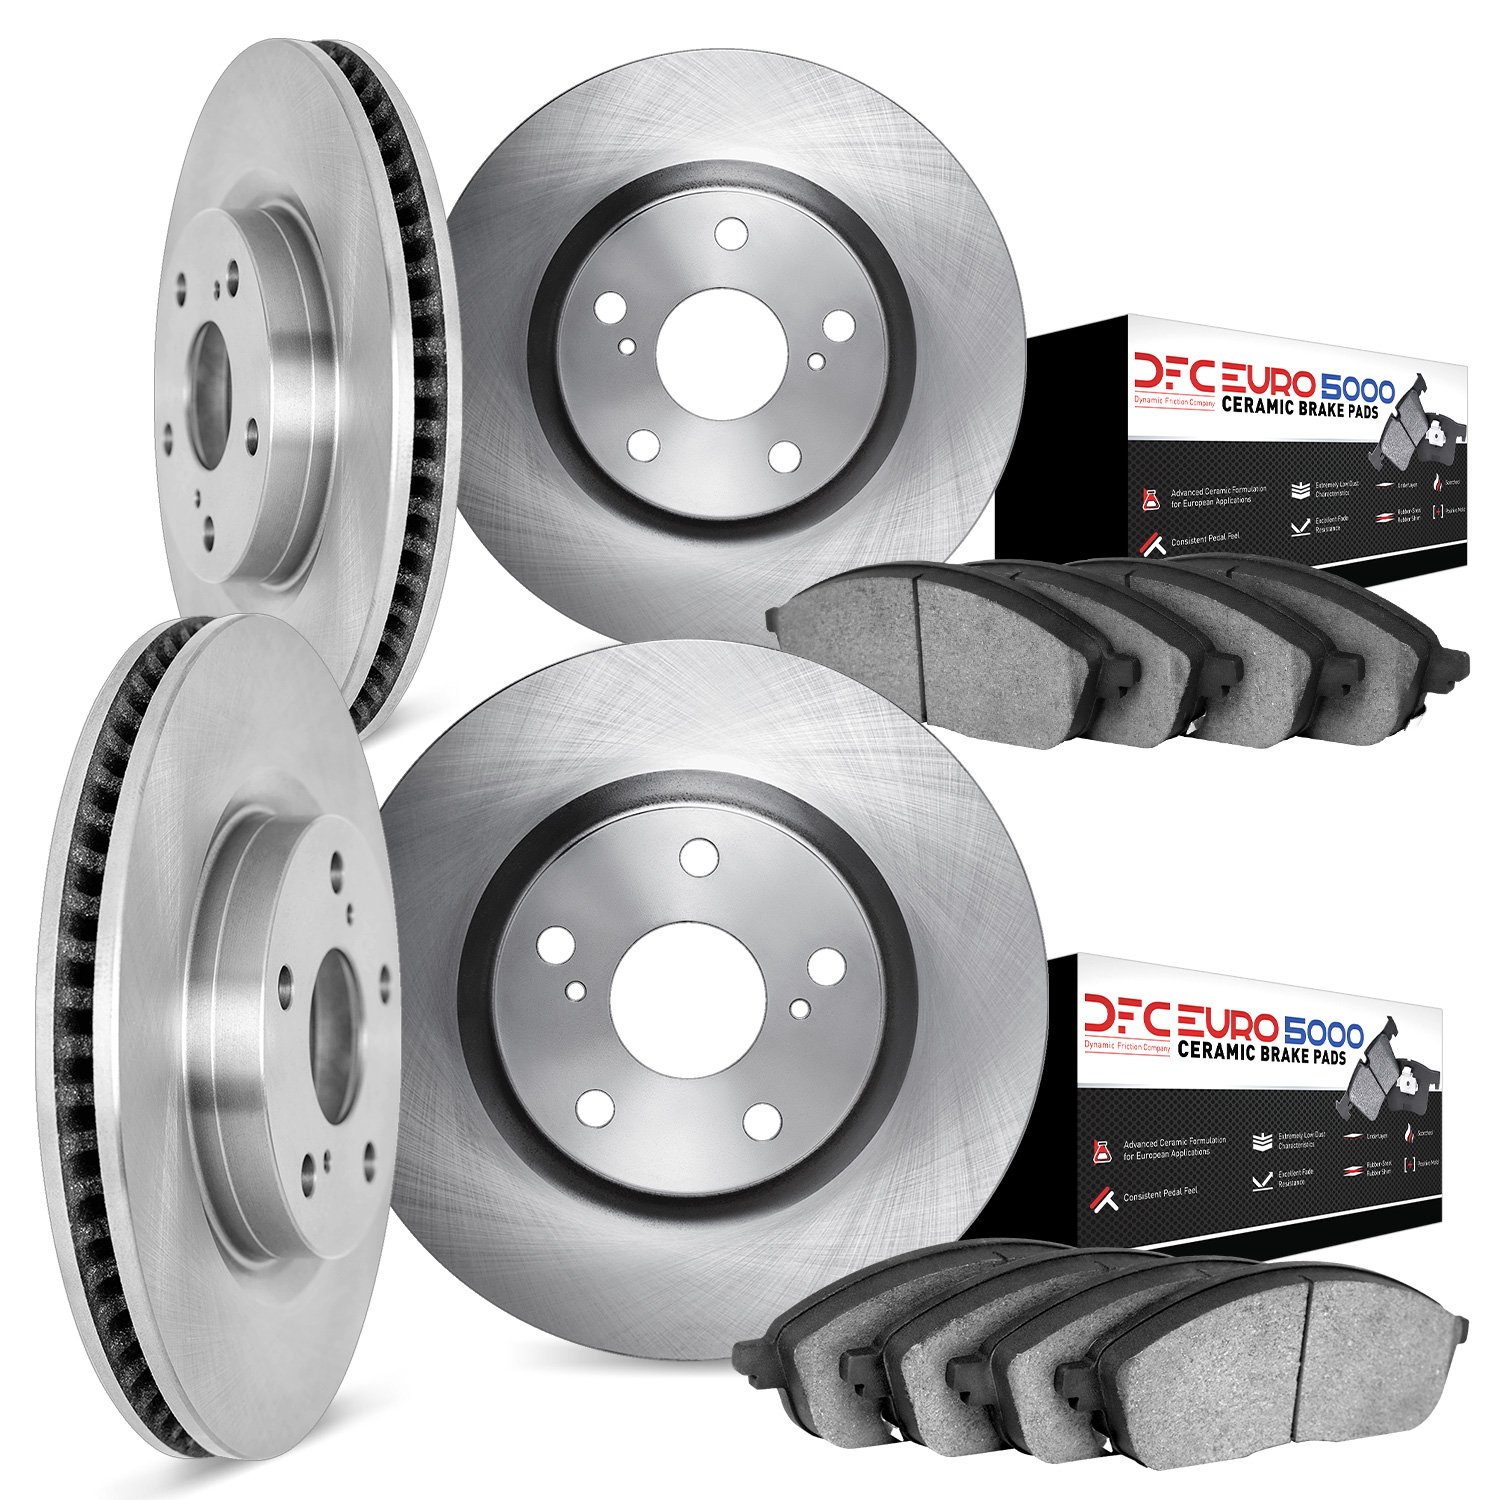 6604-31019 Brake Rotors w/5000 Euro Ceramic Brake Pads, 2008-2010 BMW, Position: Front and Rear